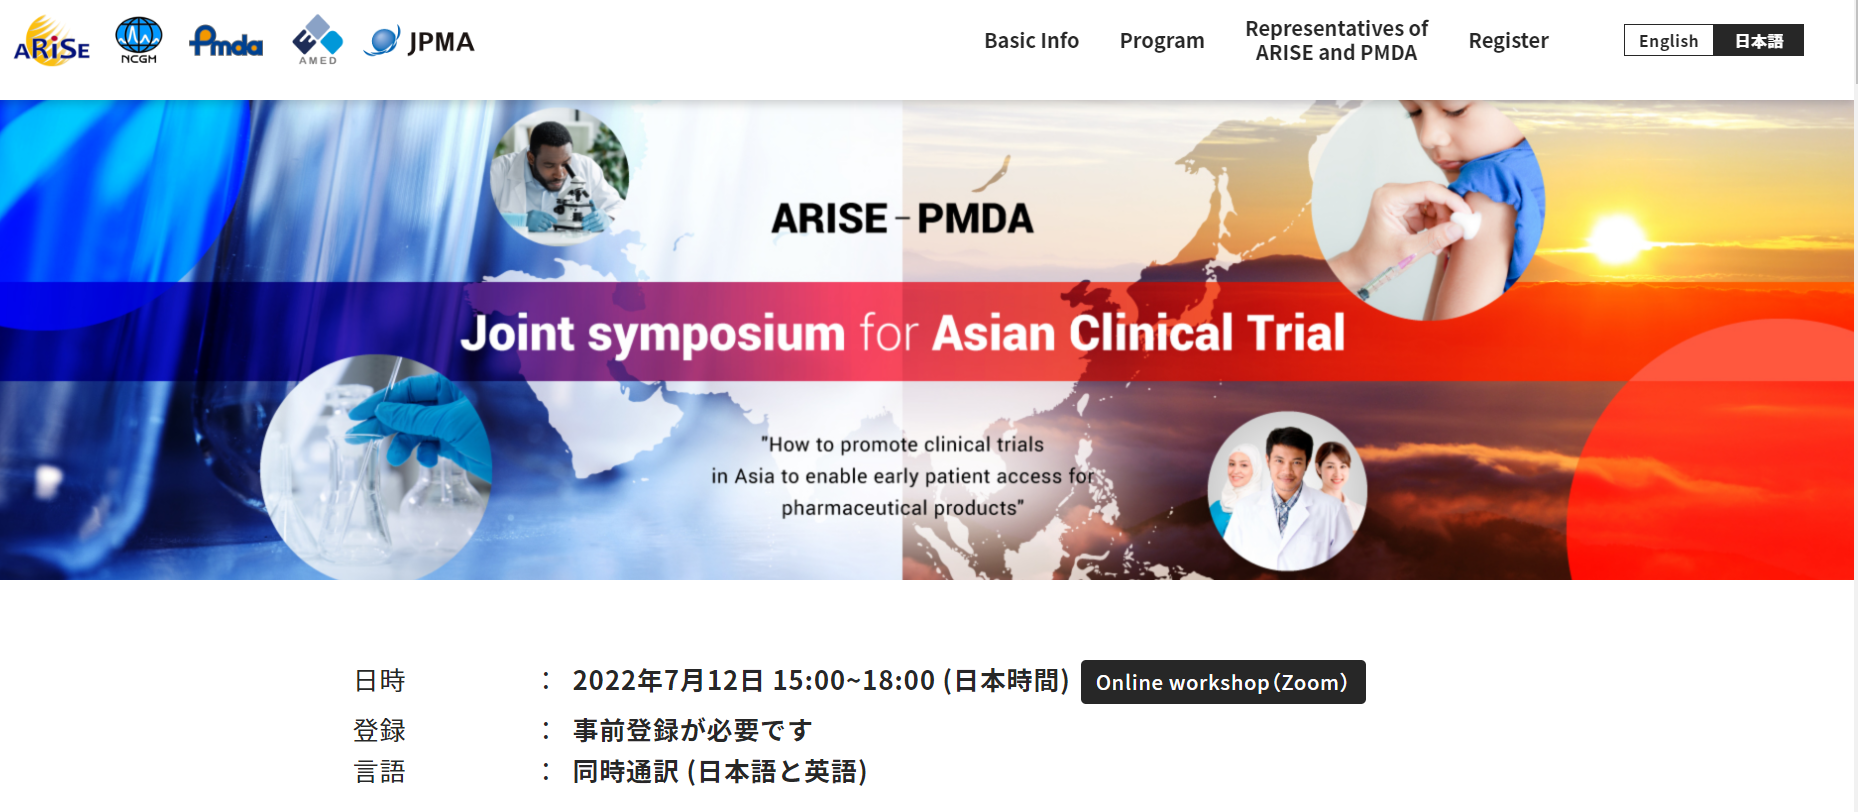 ARISE-PMDA Joint symposium for Asian Clinical Trial  "How to promote clinical trials in Asia to enable early patient access for pharmaceutical products"